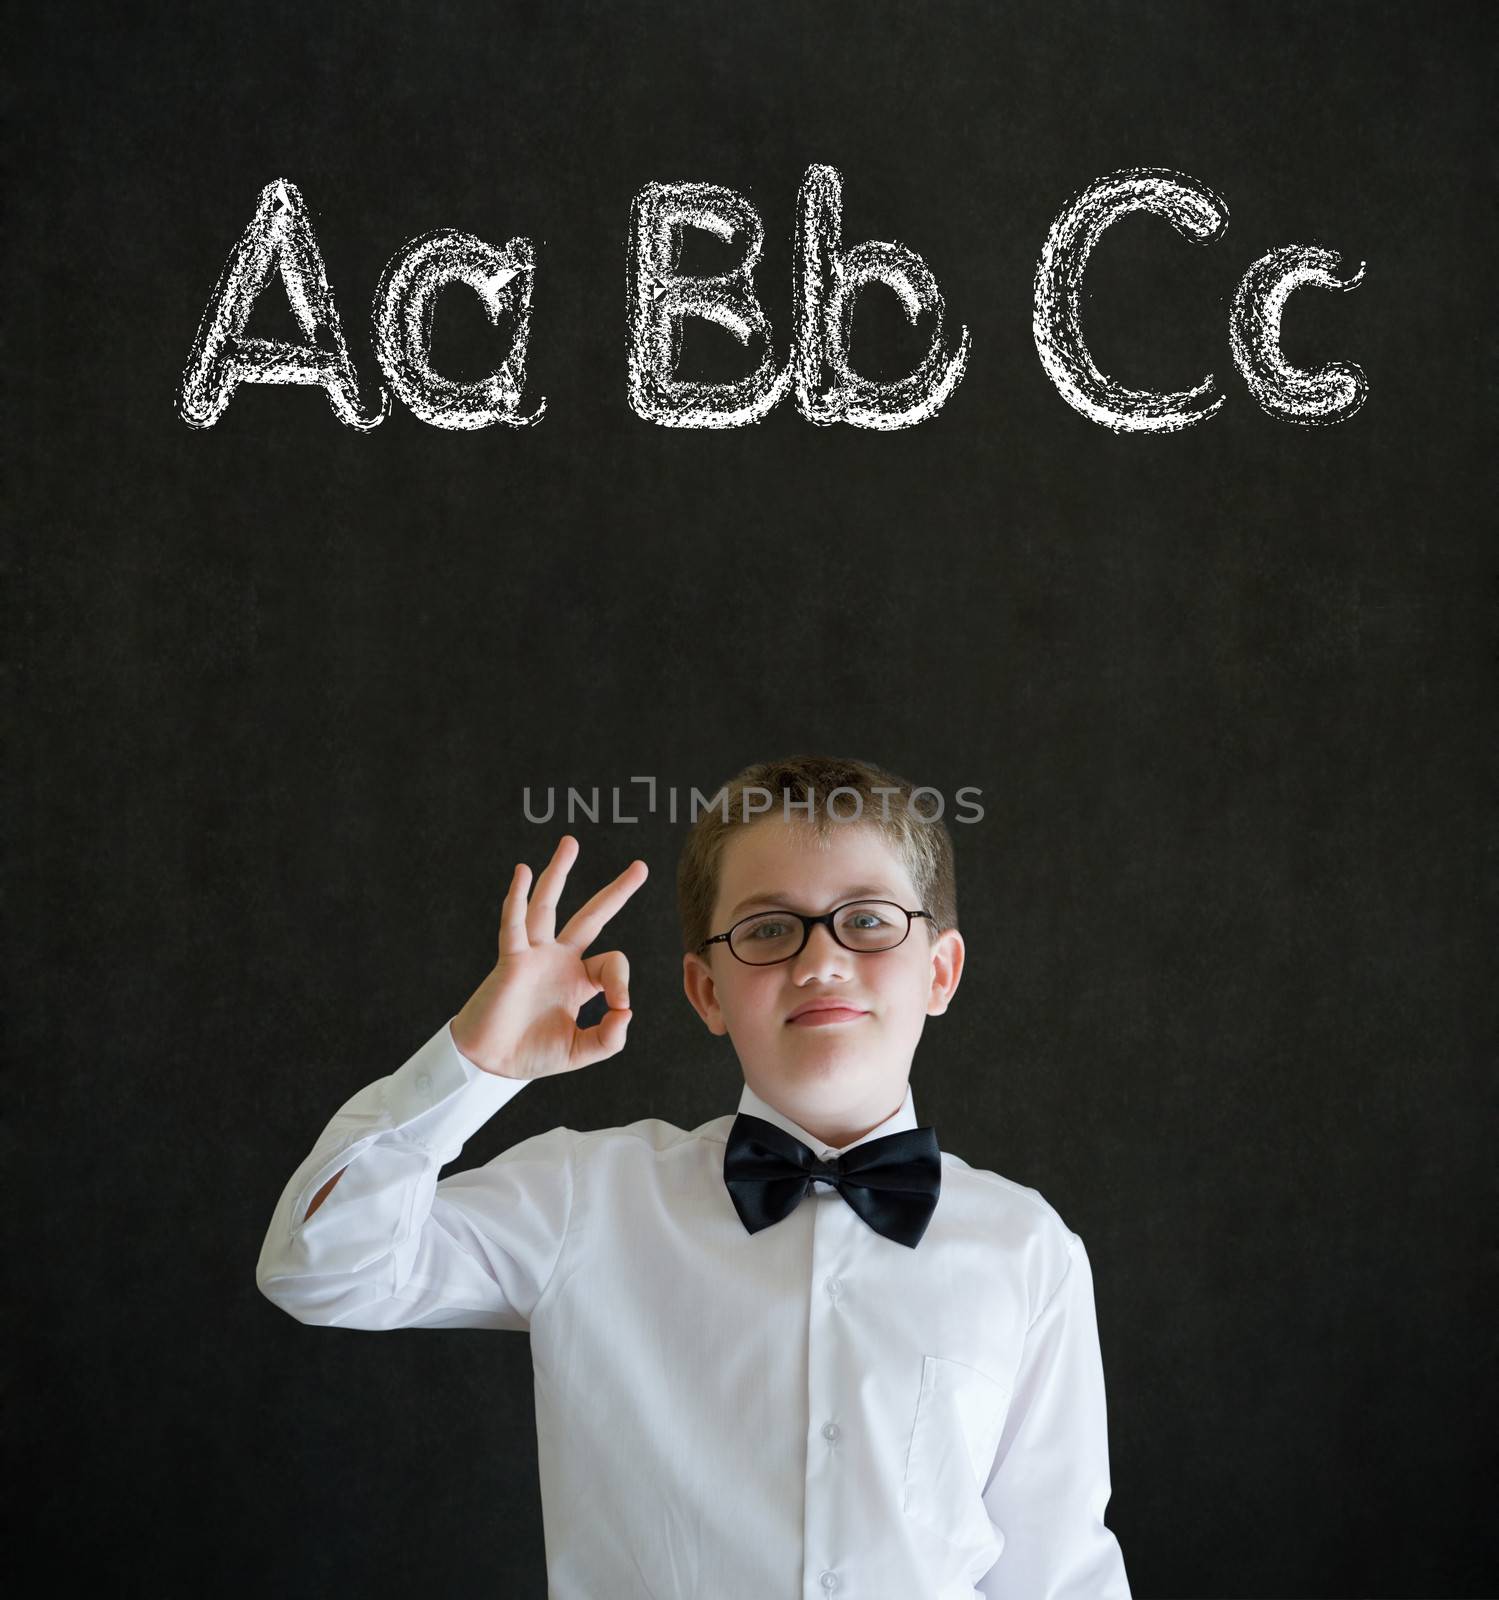 All ok or okay sign boy dressed up as business man with learn English language alphabet on blackboard background